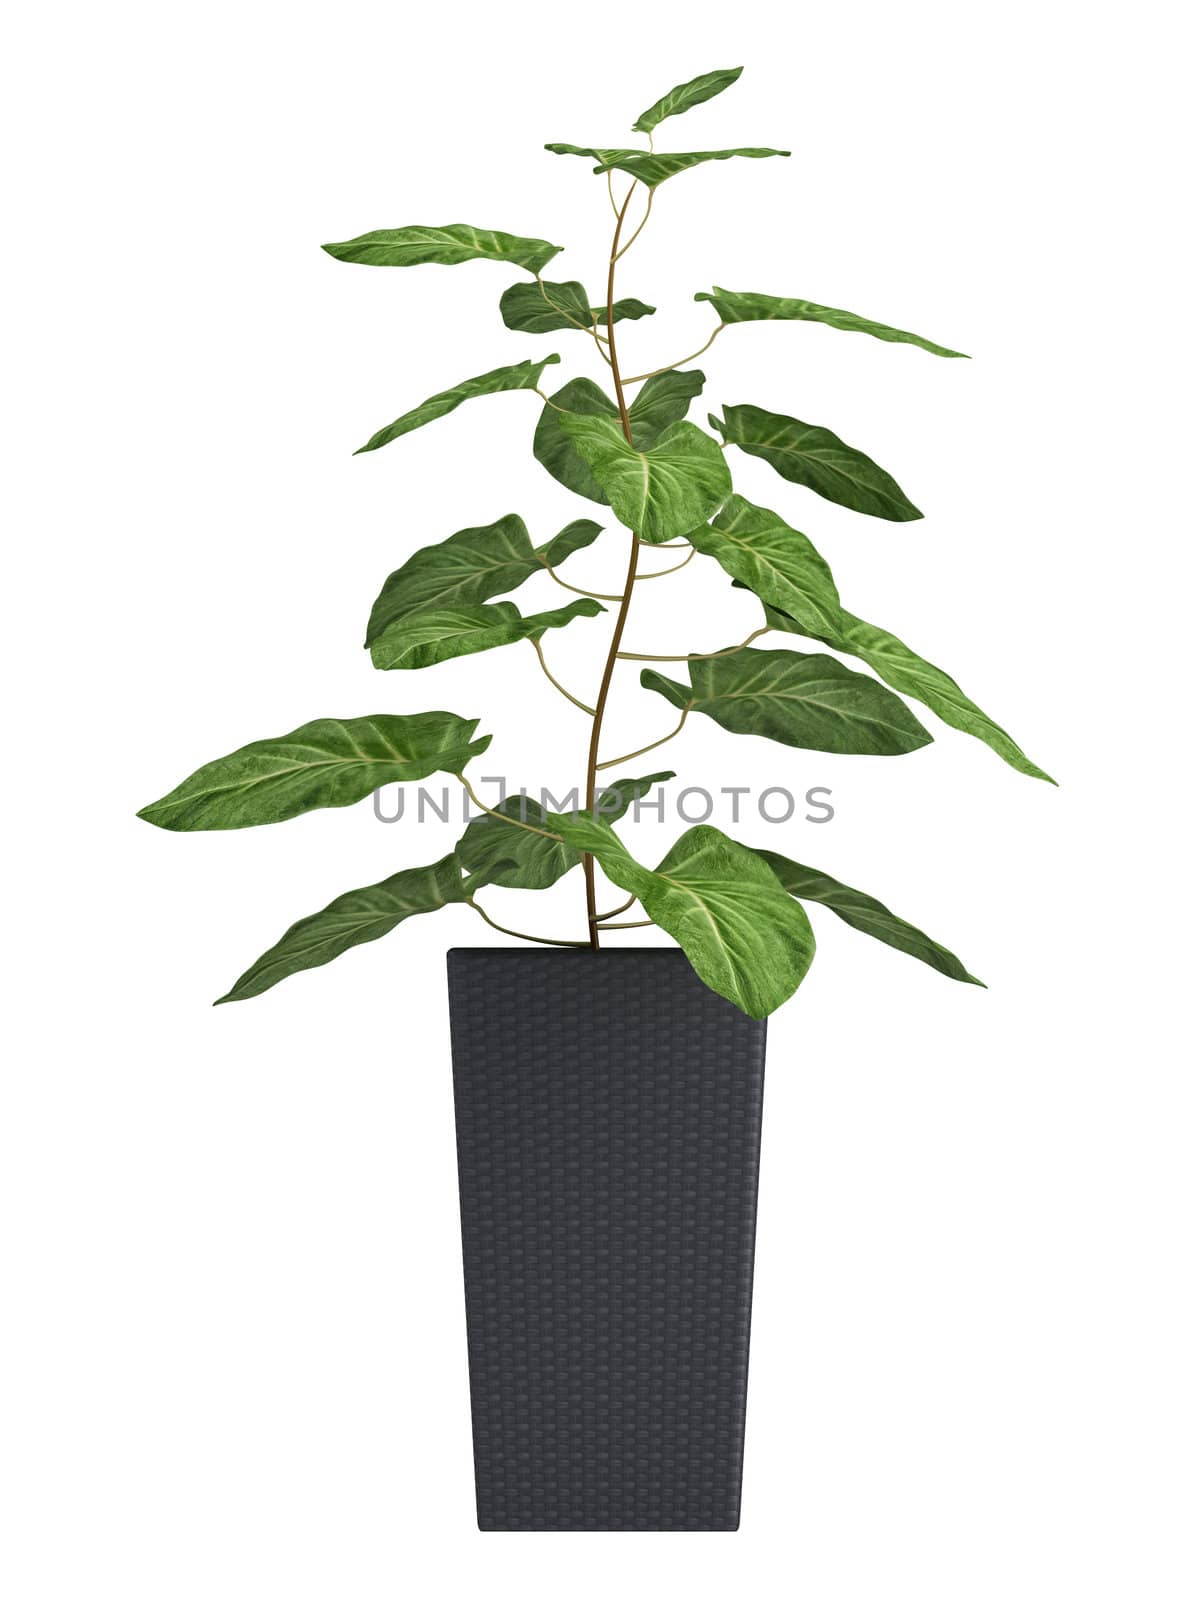 Ornamental Syngonium houseplant , a woody vine with arrowhead shaped leaves, in a black container isolated on white